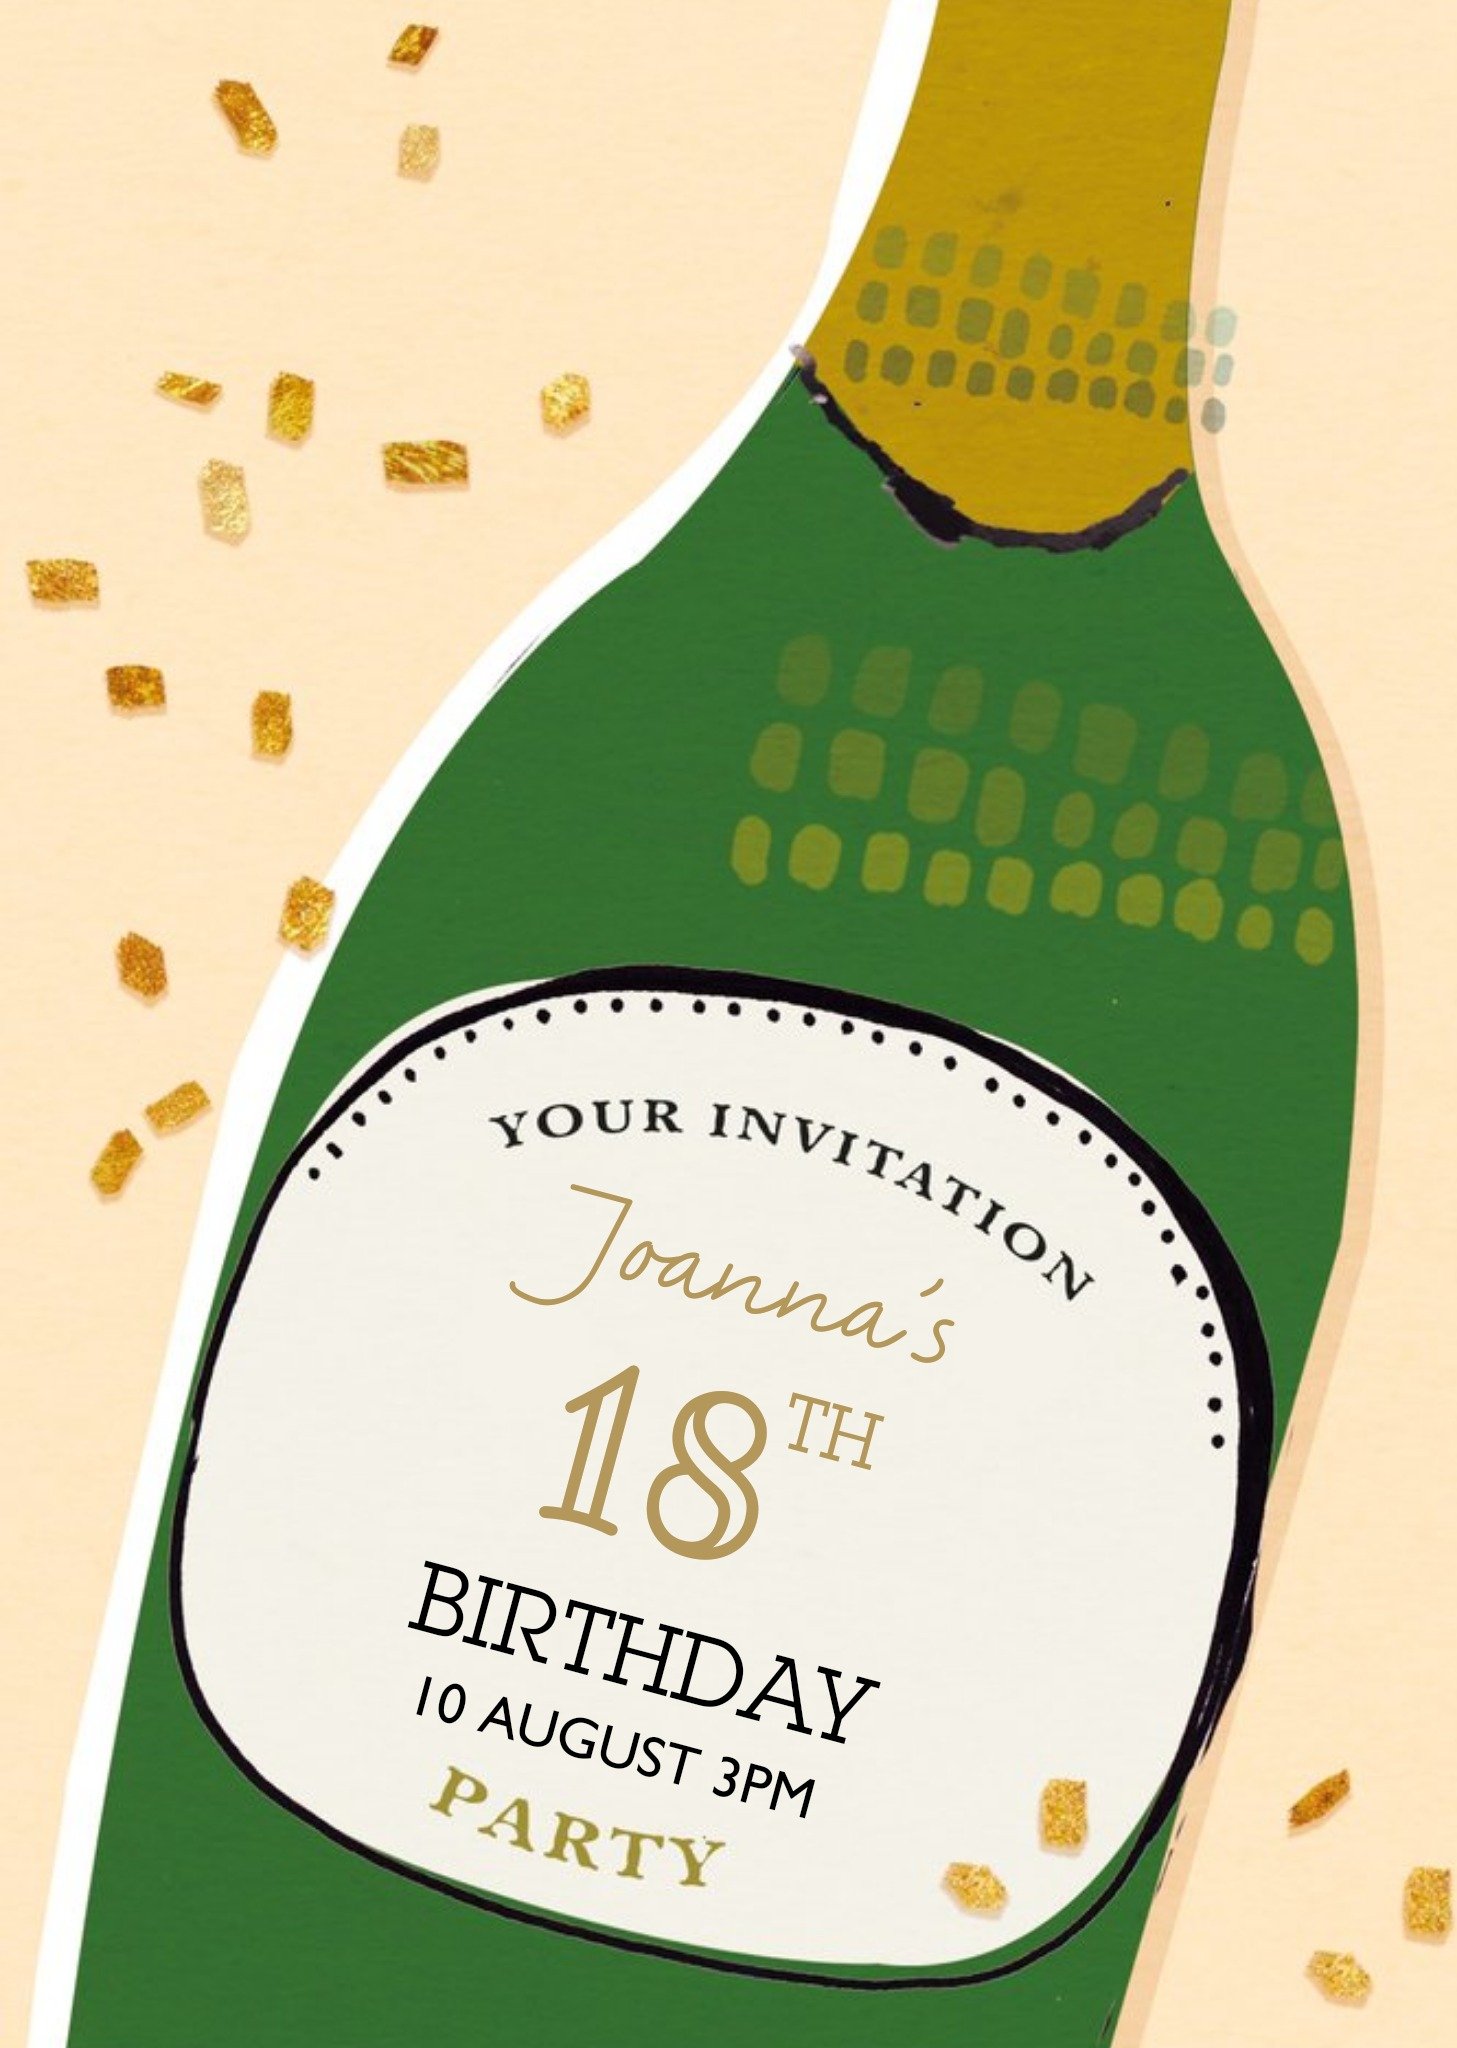 Moonpig Champagne Bottle Personalised Party Invitation Ecard